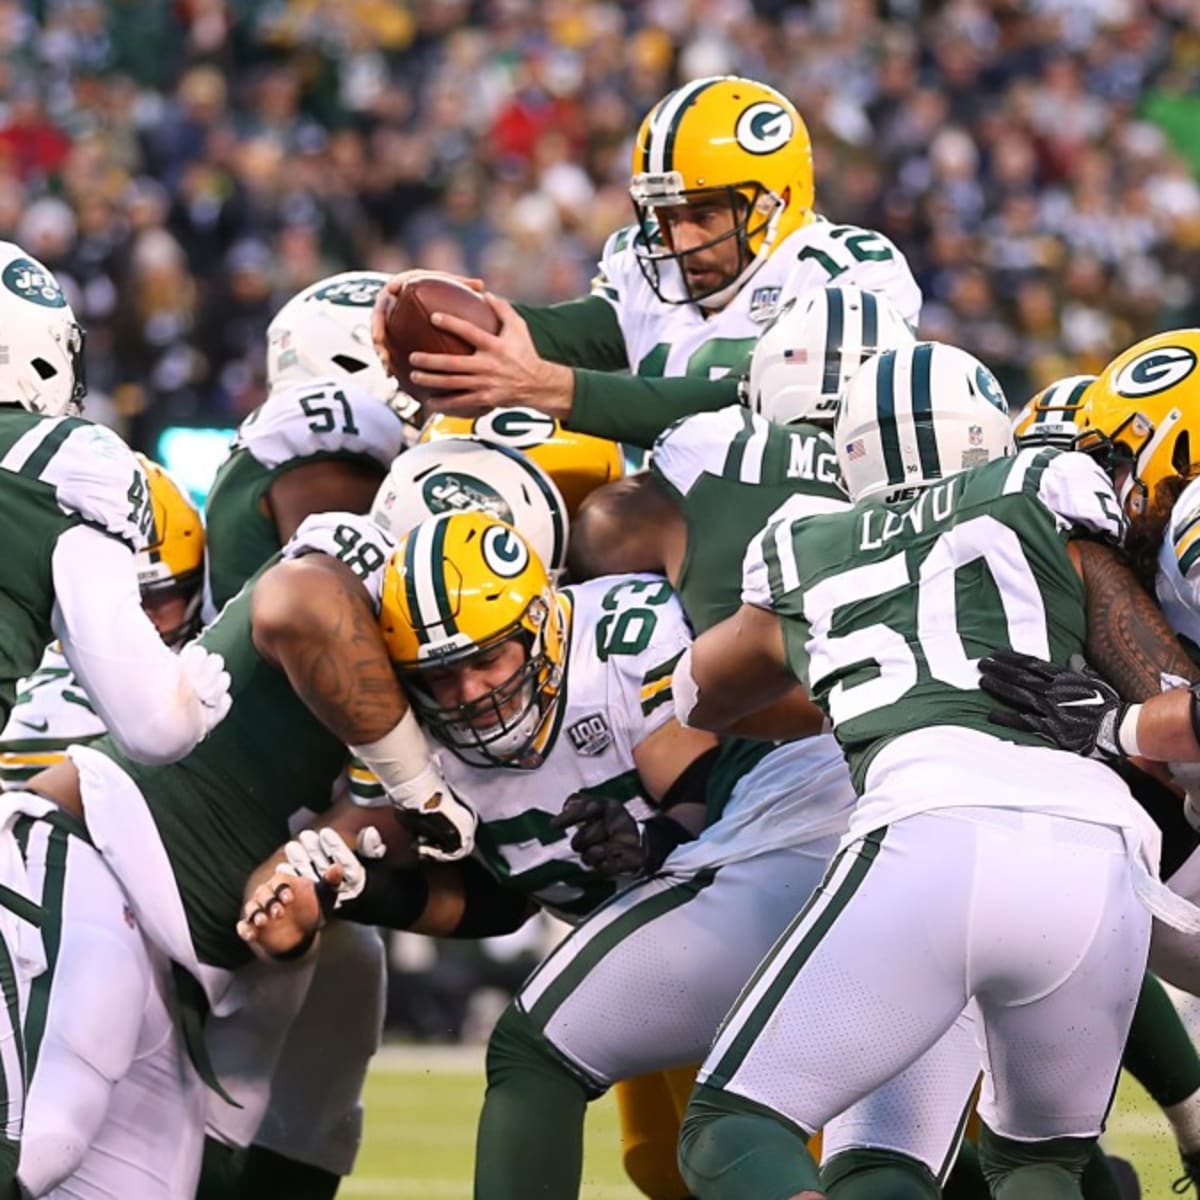 Packers vs. Jets: How to Watch, Stream, Listen, Bet - Sports